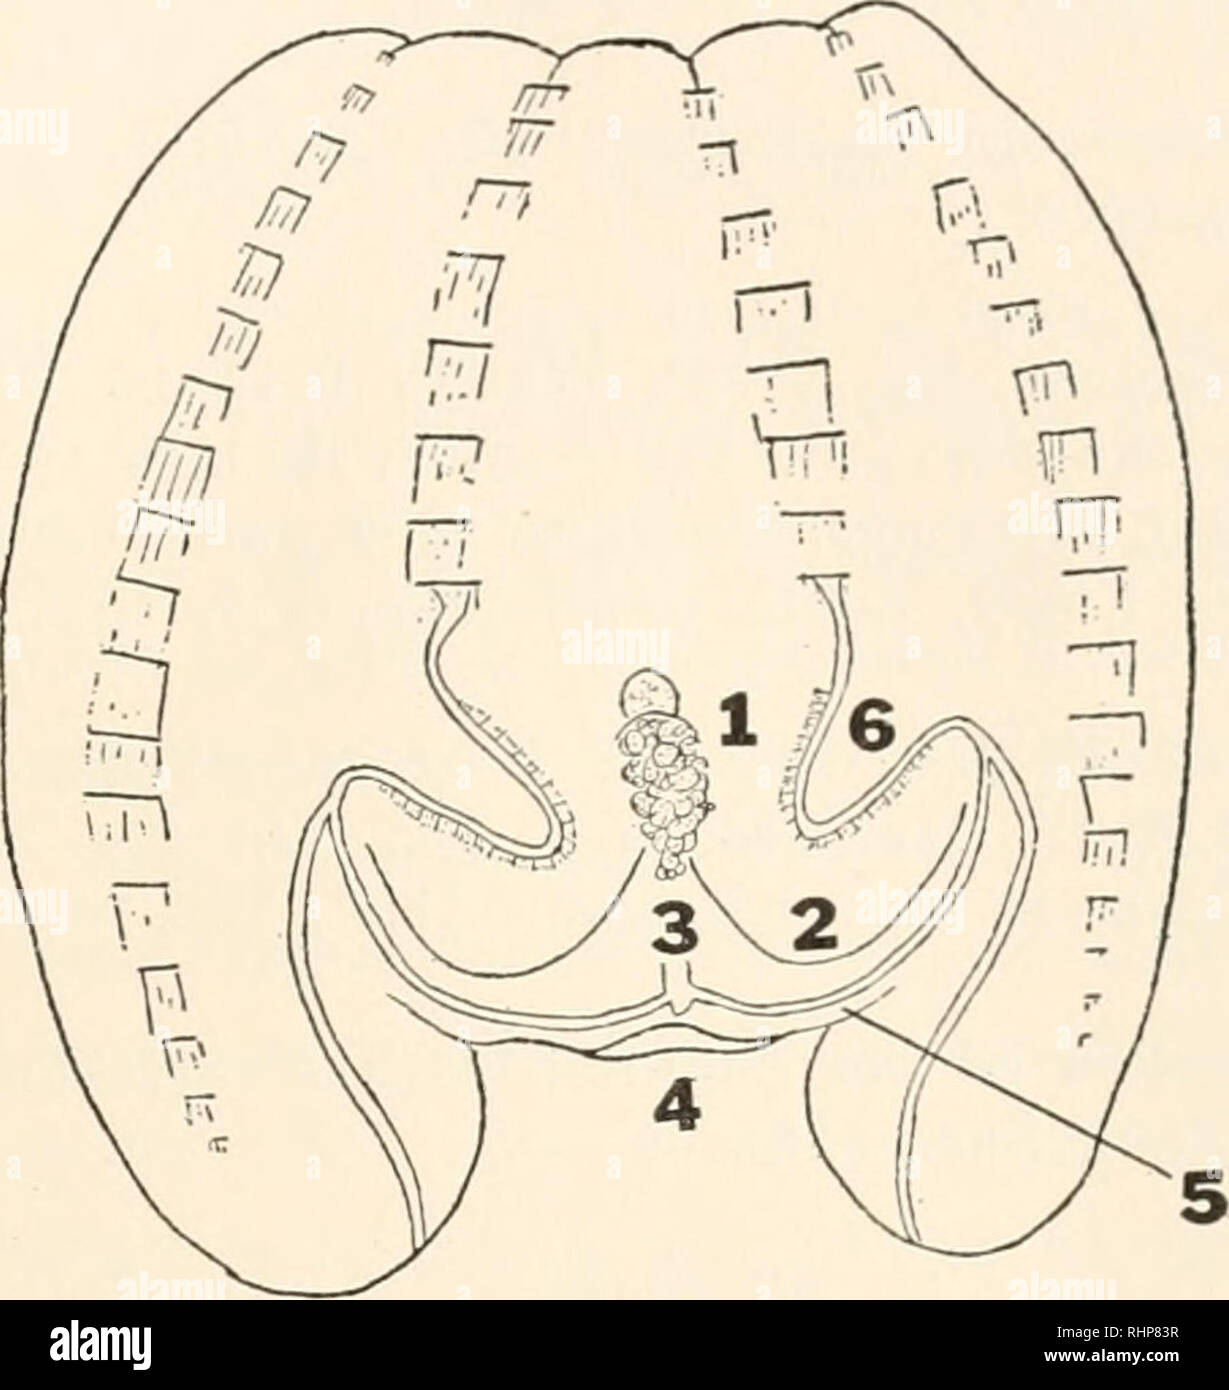 . The Biological bulletin. Biology; Zoology; Biology; Marine Biology. FEEDING MECHANISM OF MXEMIOPSIS. 77 This remarkable food catching apparatus of Mnemiopsis, in which the conveying system seems to foreshadow that of the bivalves, is certainly a great advance over that of the Scyphozoa.. FIG. 9. Young Mnemiopsis Icidyi, 8 mm. high. i. Branched tentacle en- tirely retracted, but same as in Fig. 7. 2. Tentacular ridge. 3. Paragastric canal, termination shown with branches. 4. Mouth. 5. Beginning of labial ridge. 6. Developing auricles. Of its efficiency there can be no doubt, for compare Bigel Stock Photo